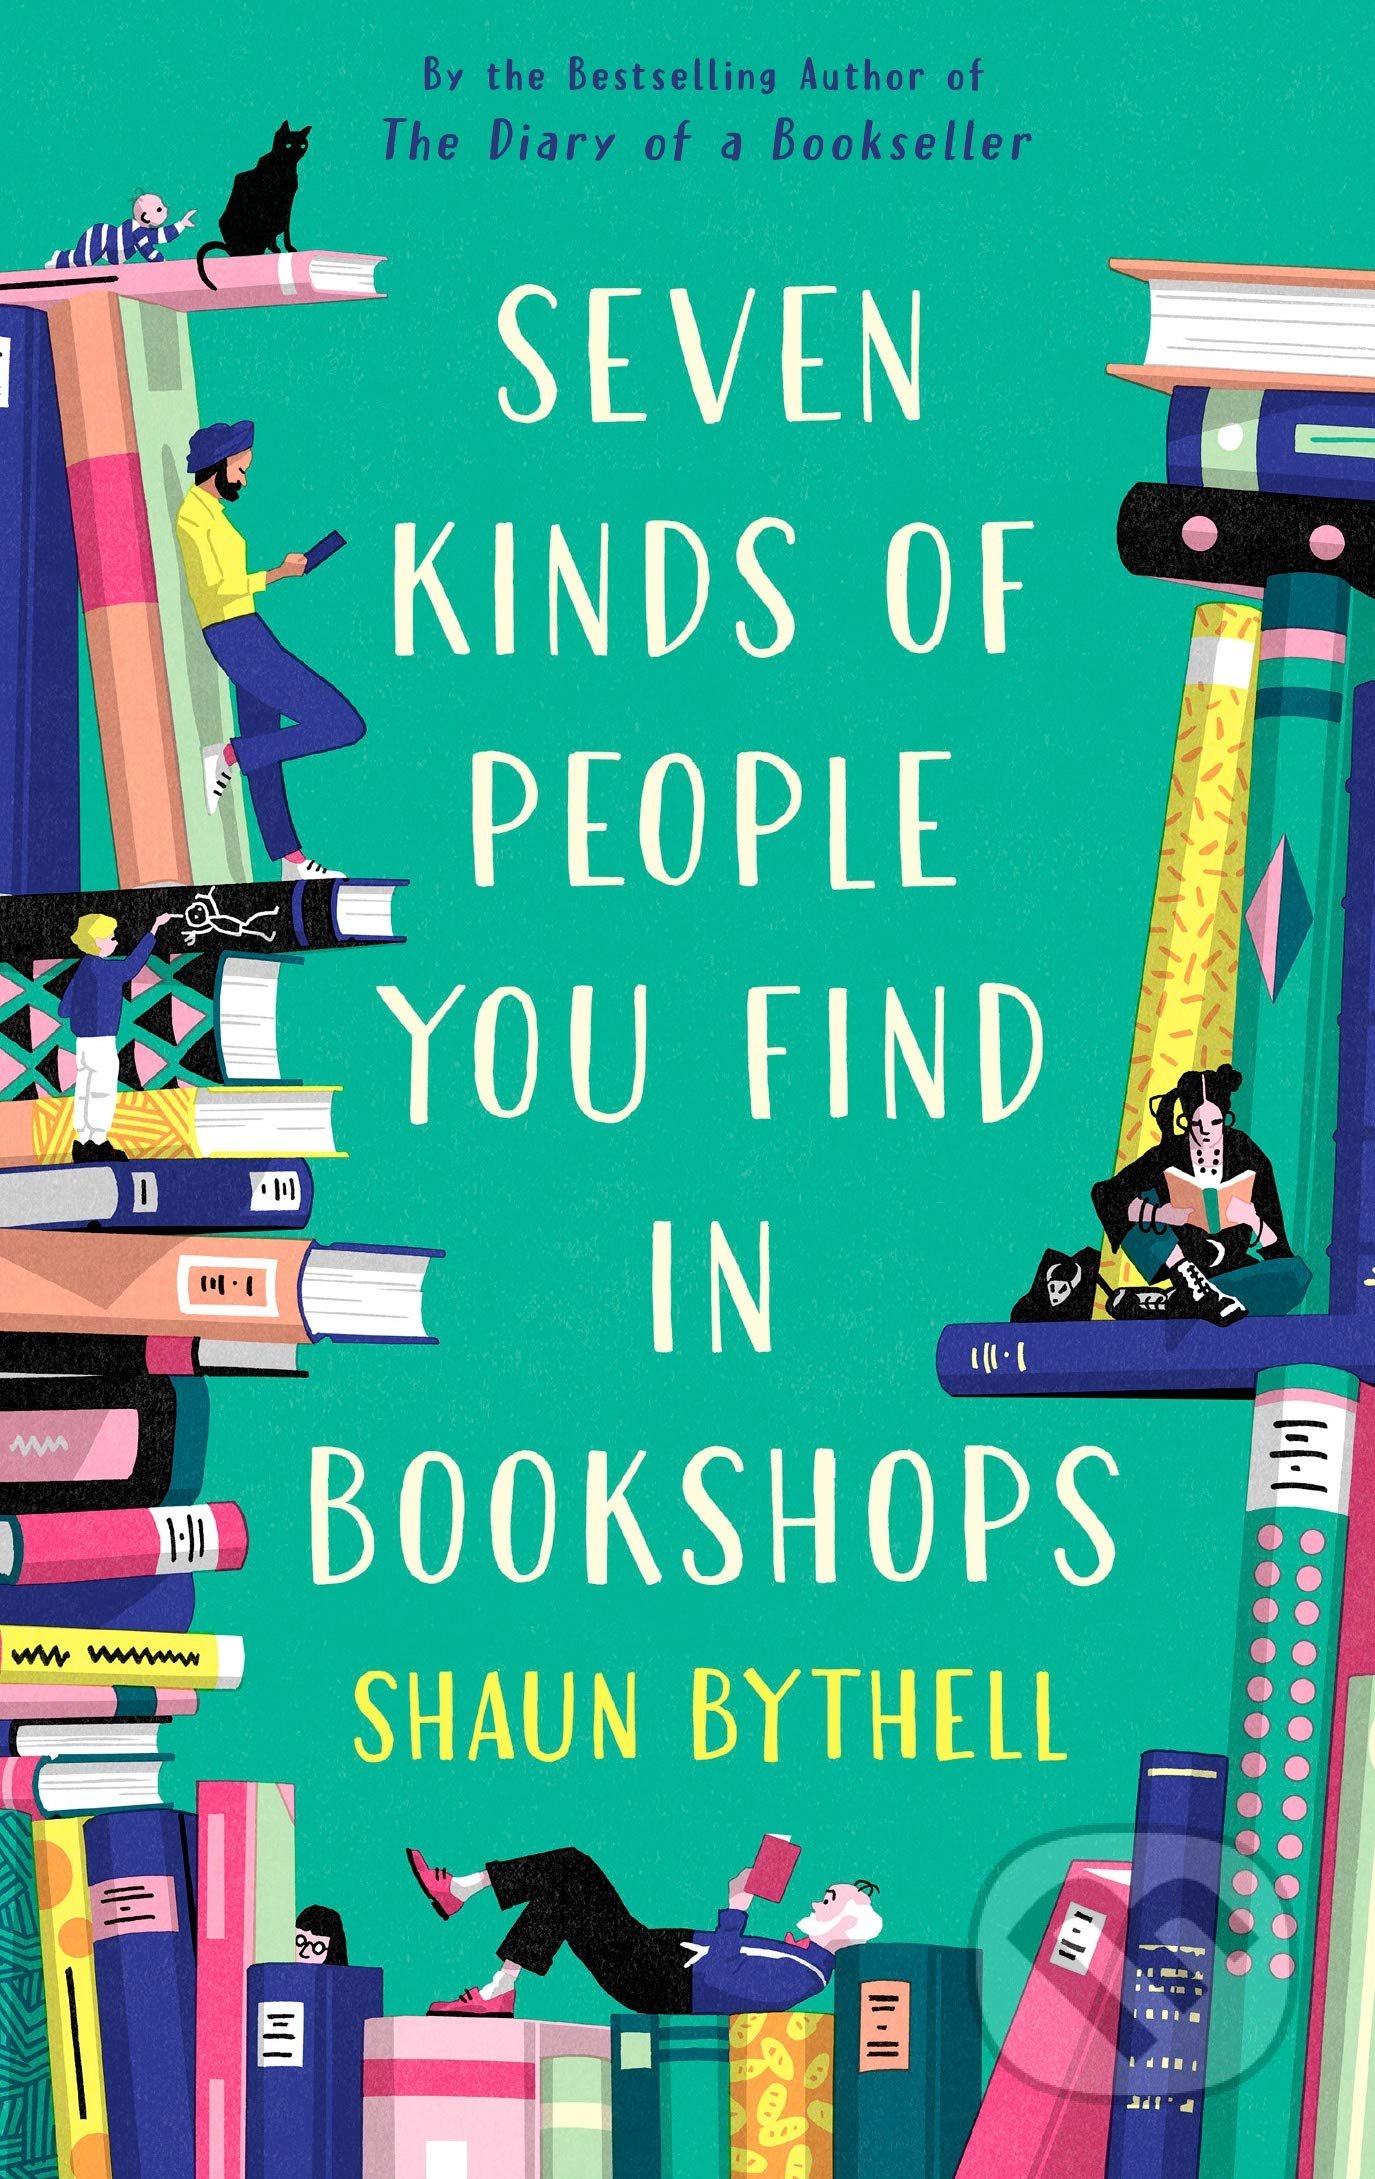 Seven Kinds of People You Find in Bookshops - Shaun Bythell, Profile Books, 2020